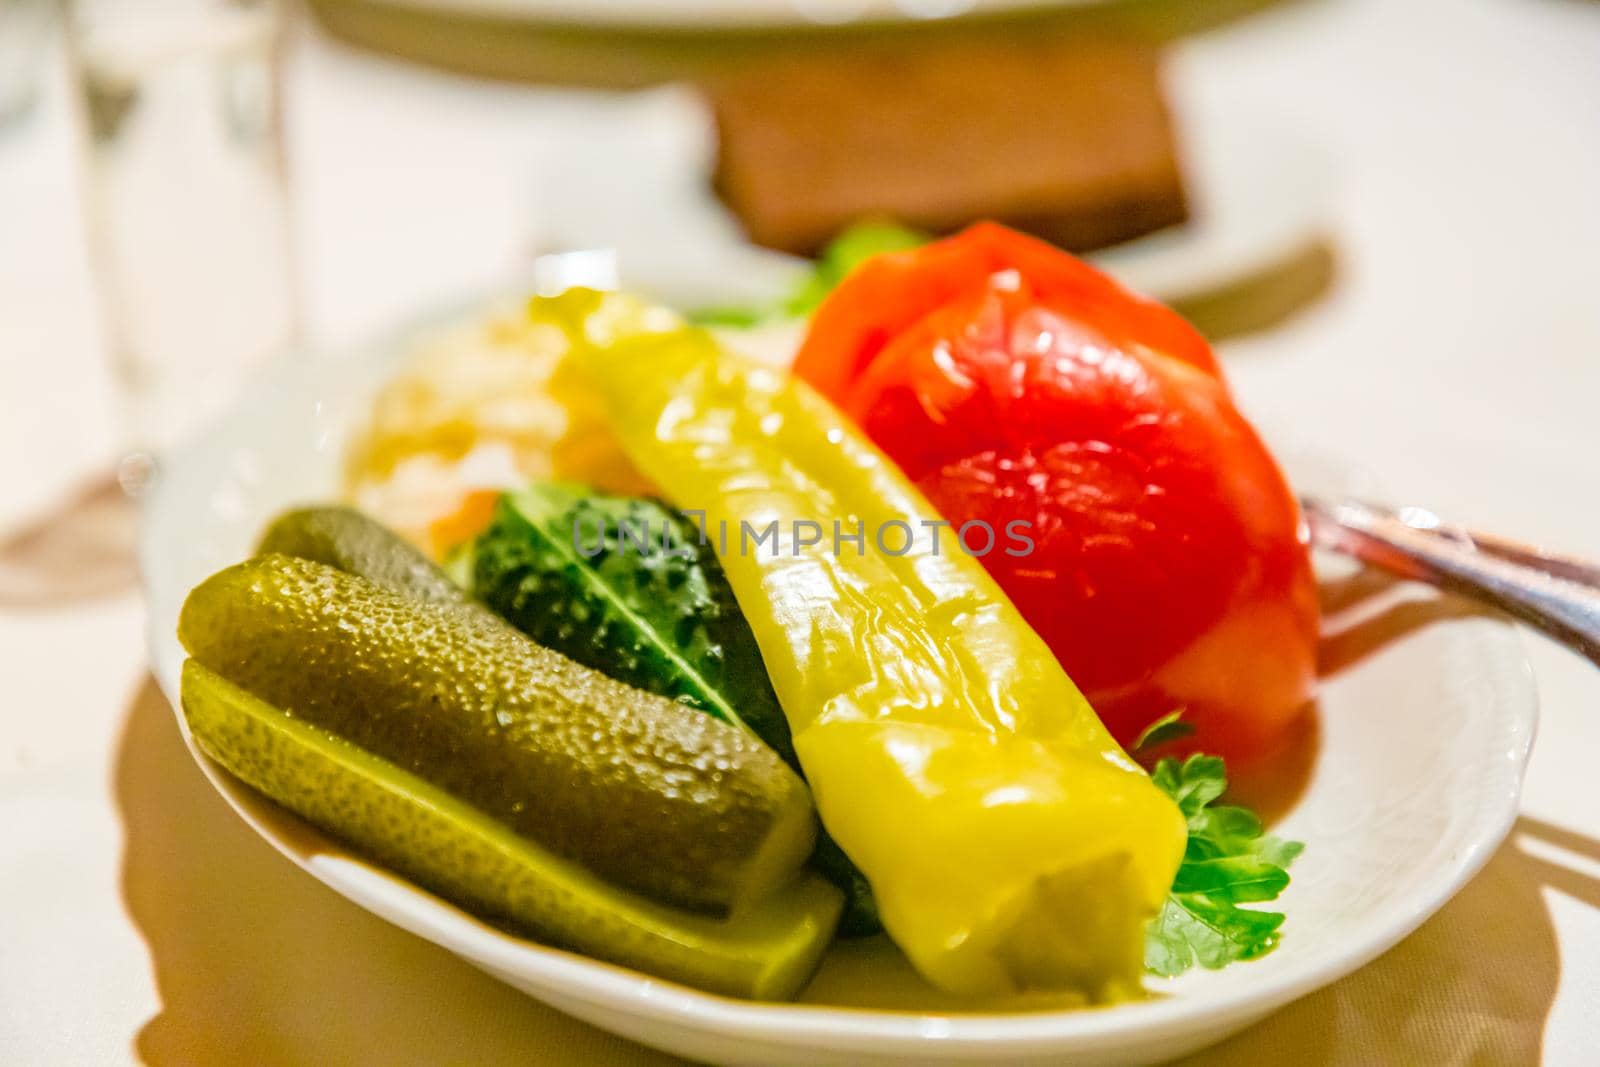 Traditional Russian snacks (pickles, tomatoes, sauerkraut) are on the plate.